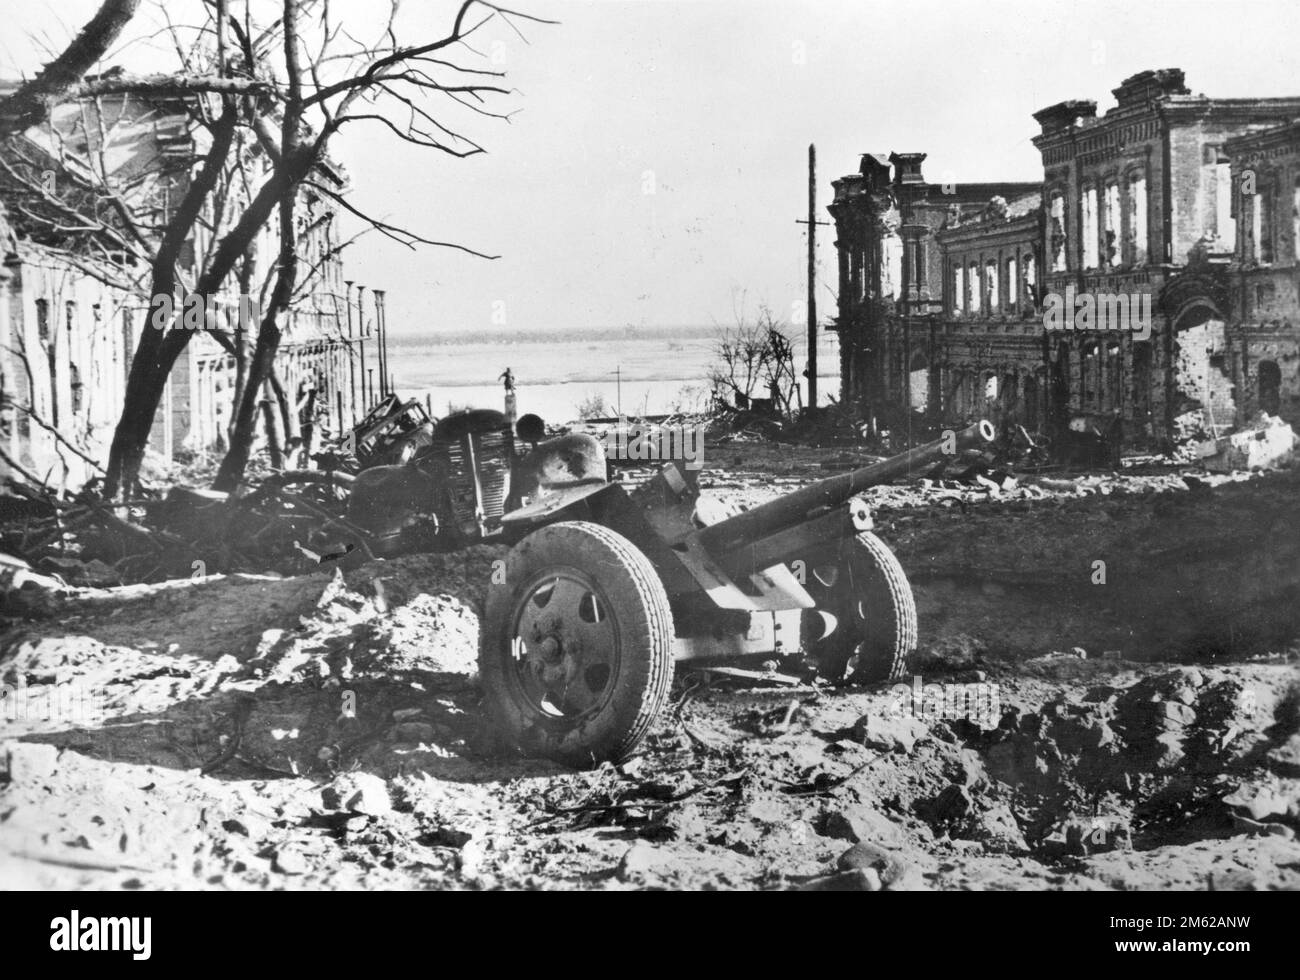 Destroyed Soviet cannon and military vehicle in Stalingrad on the banks of the Volga River during the Battle of Stalingrad Stock Photo